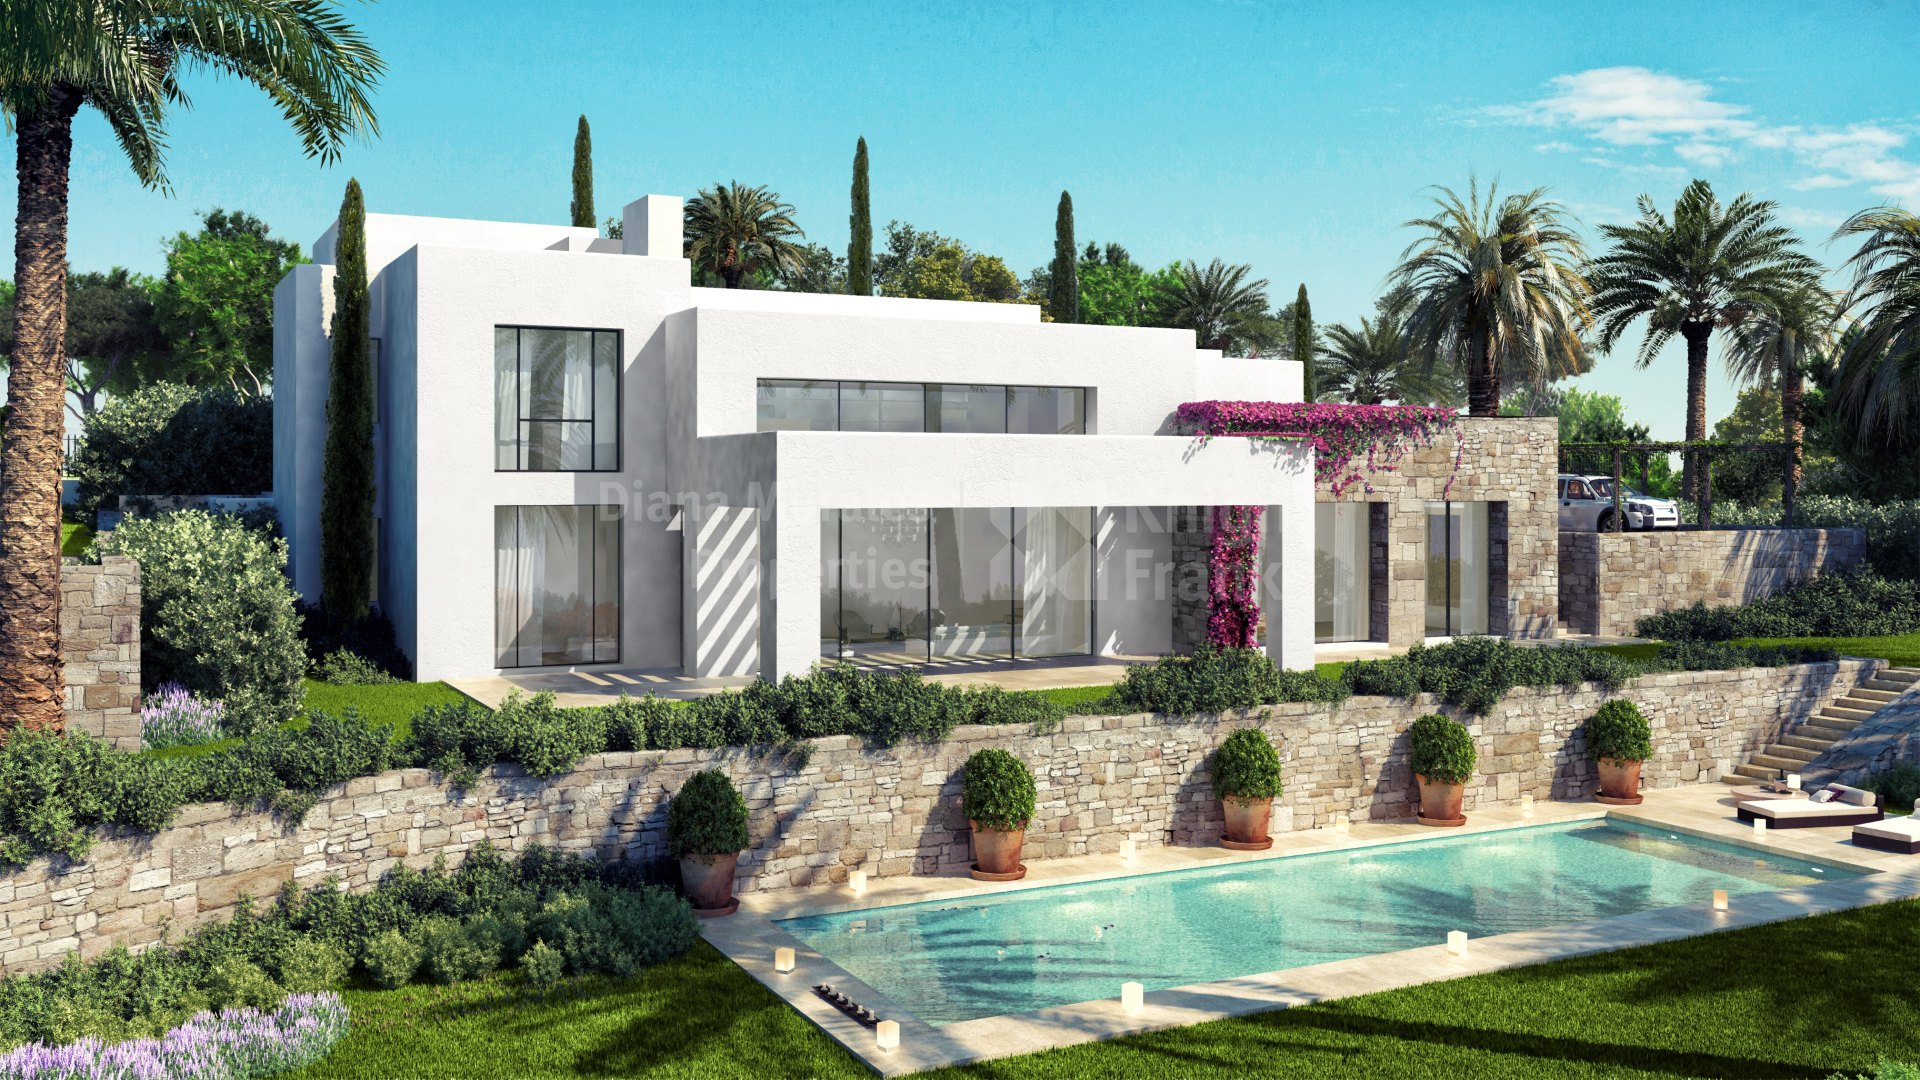 Casares, House Under Construction within Golf Course